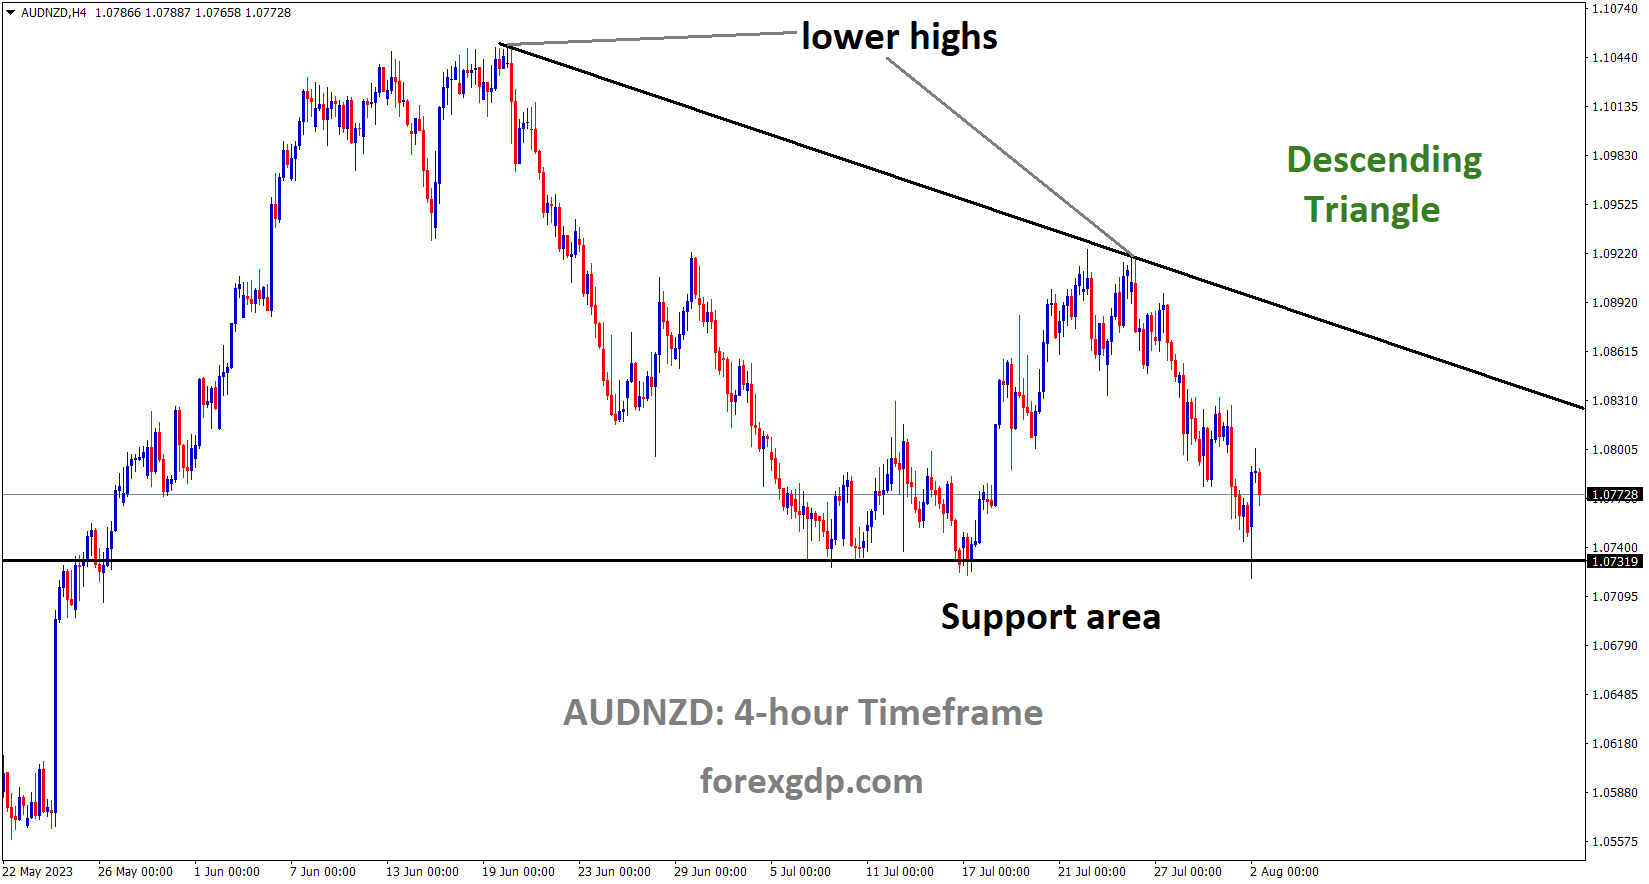 AUDNZD is moving in the Descending triangle pattern and the market has rebounded from the horizontal support area of the pattern